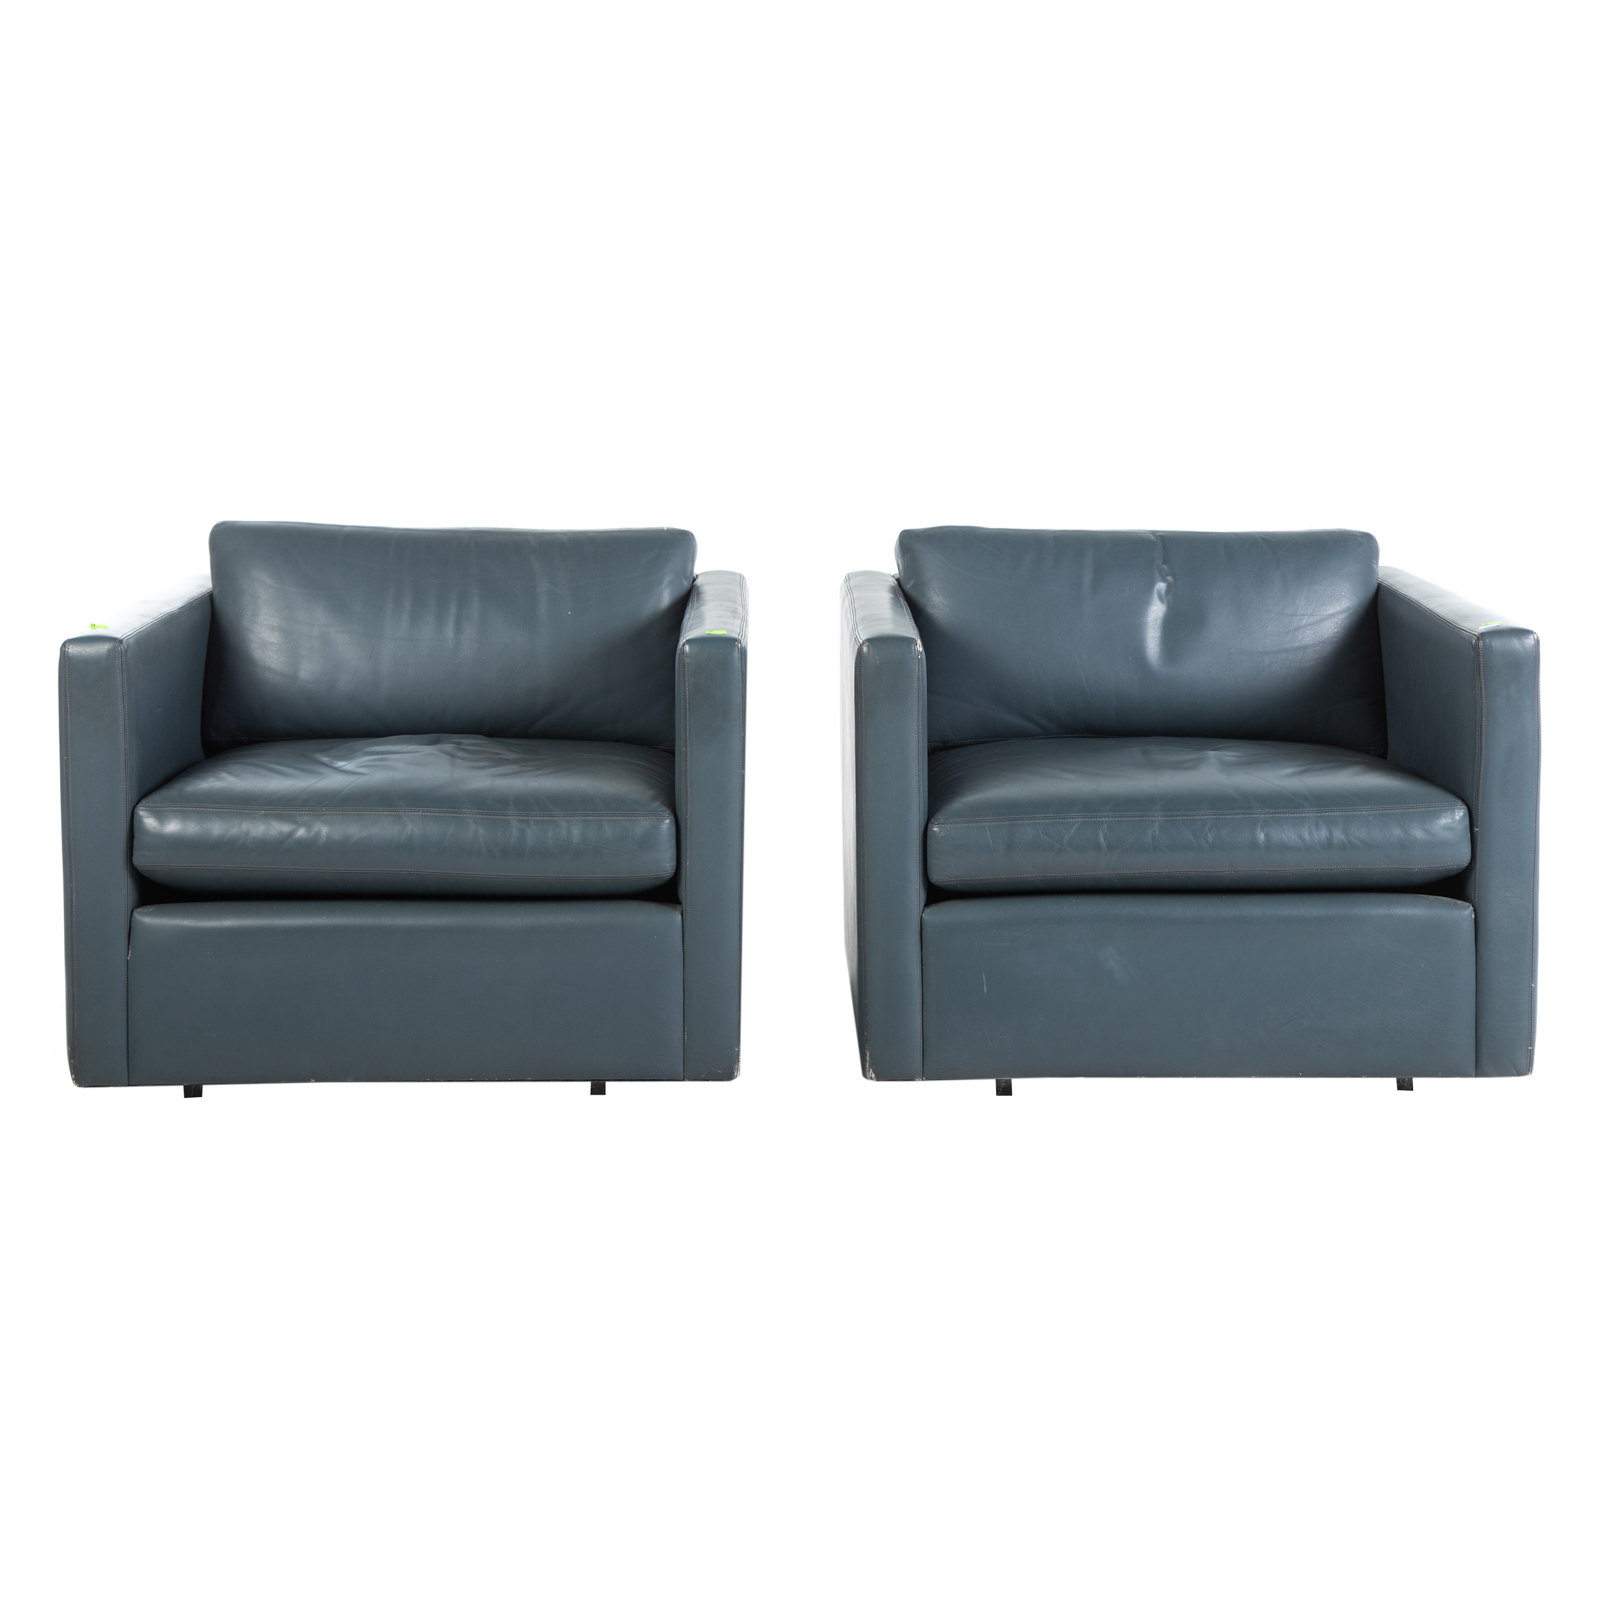 A PAIR OF CHARLES PFISTER FOR KNOLL 287209